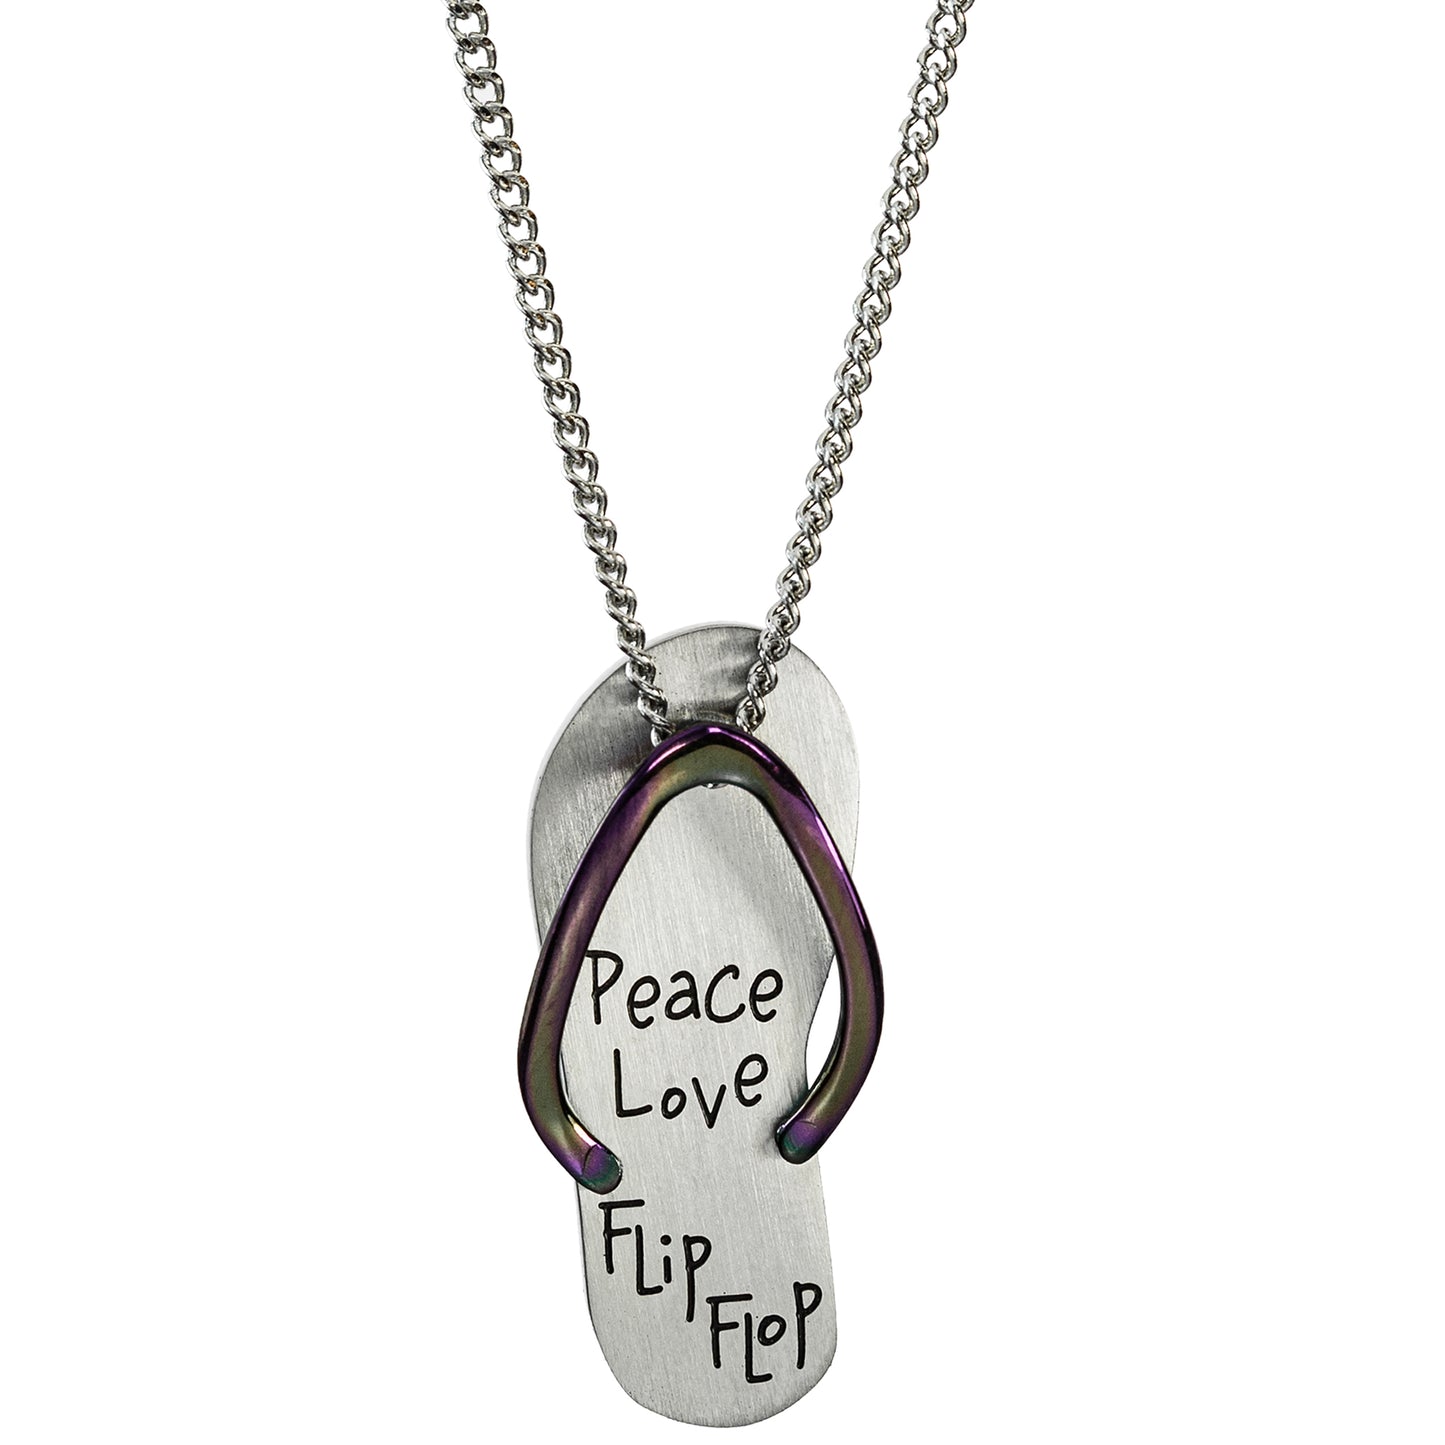 Peace Love Flip Flop Stainless Steel Pendant Necklace - Summer Beach Jewelry